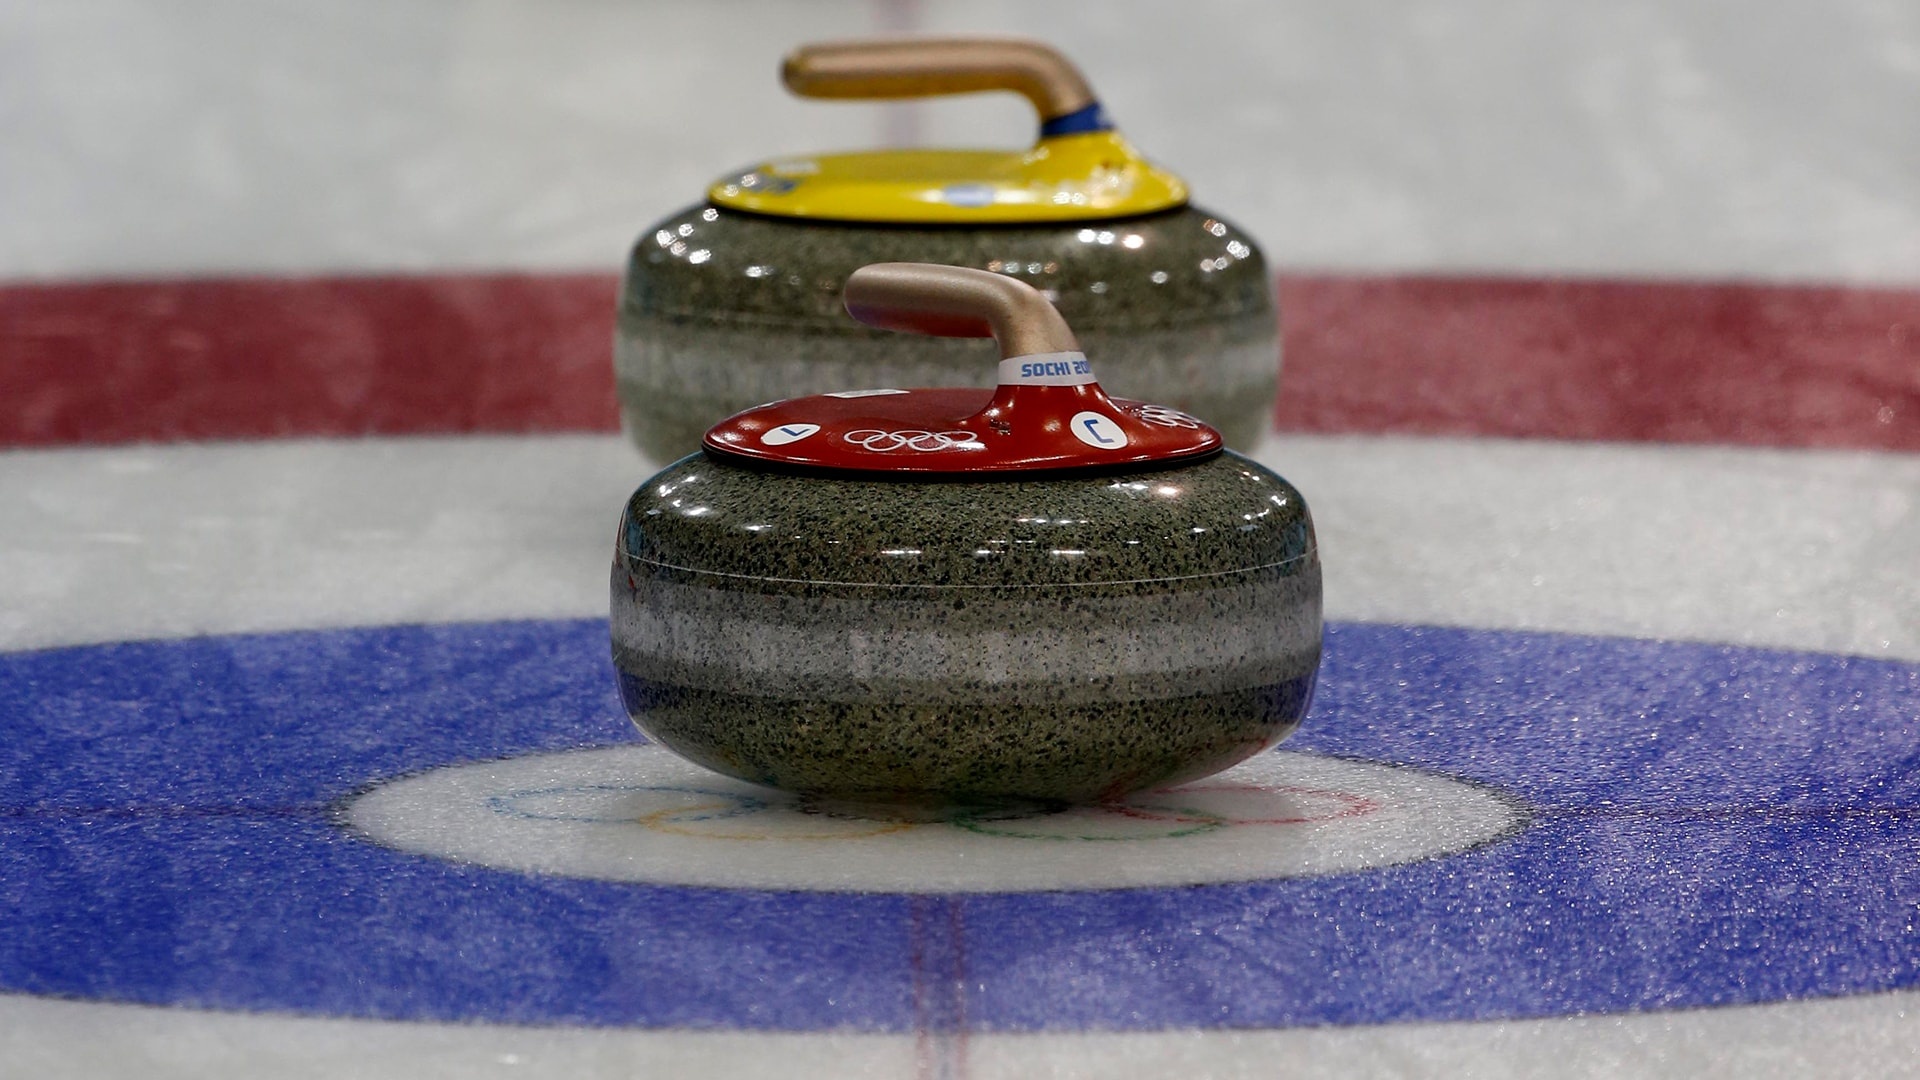 Curling: Official Olympic granite stones exclusively manufactured by Kays of Scotland. 1920x1080 Full HD Wallpaper.